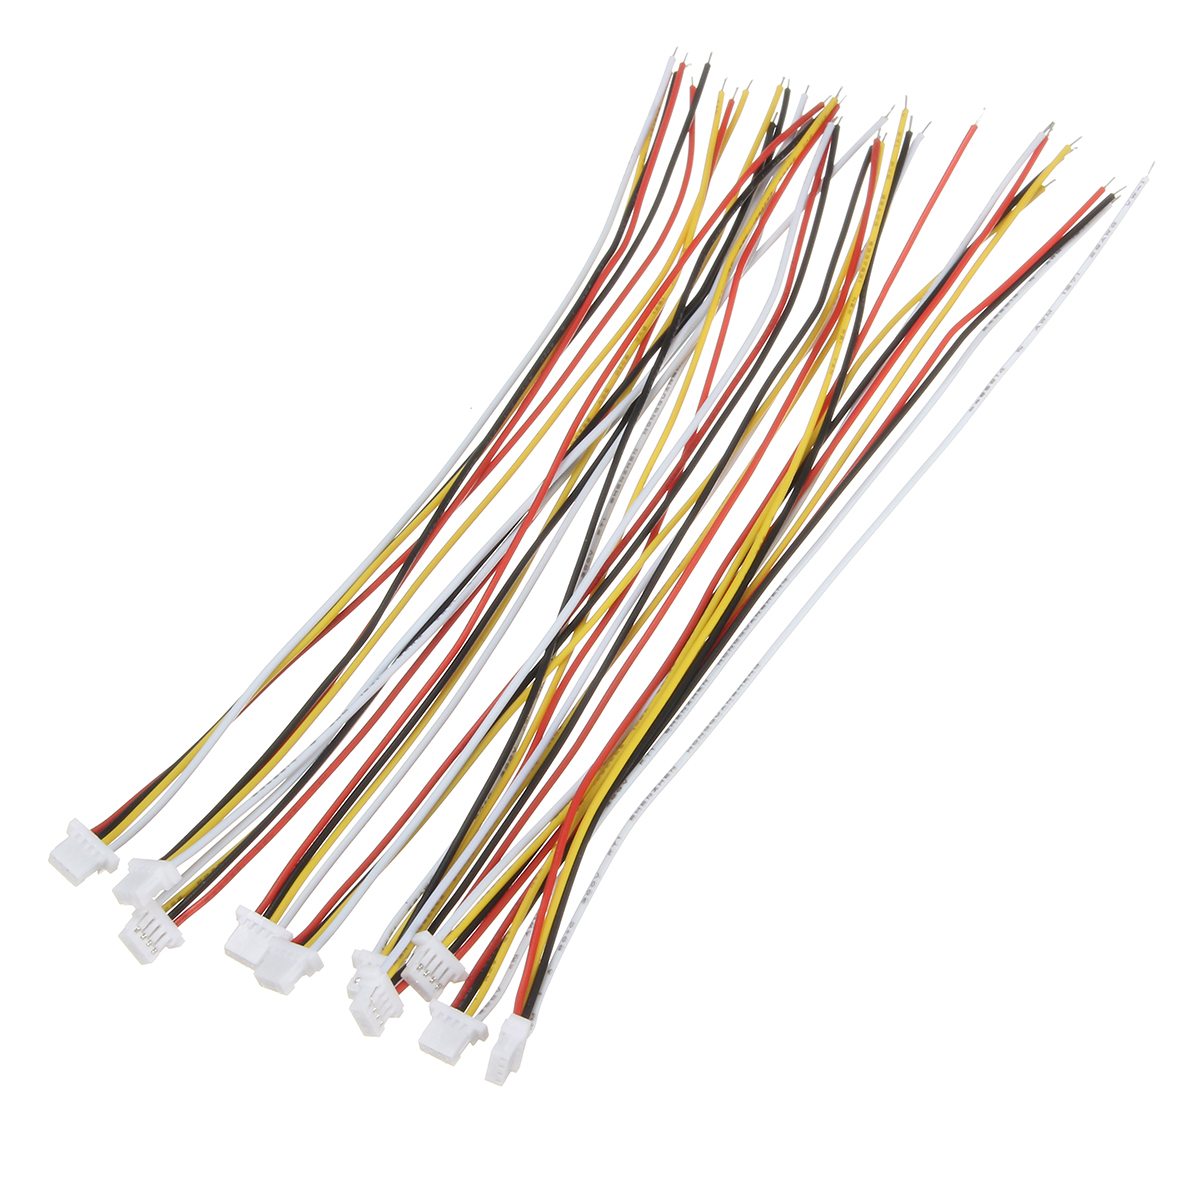 Find Excellway 20Pcs Mini Micro JST 1 0mm SH 4 Pin Connector Plug With Wire Cables 300mm for Sale on Gipsybee.com with cryptocurrencies